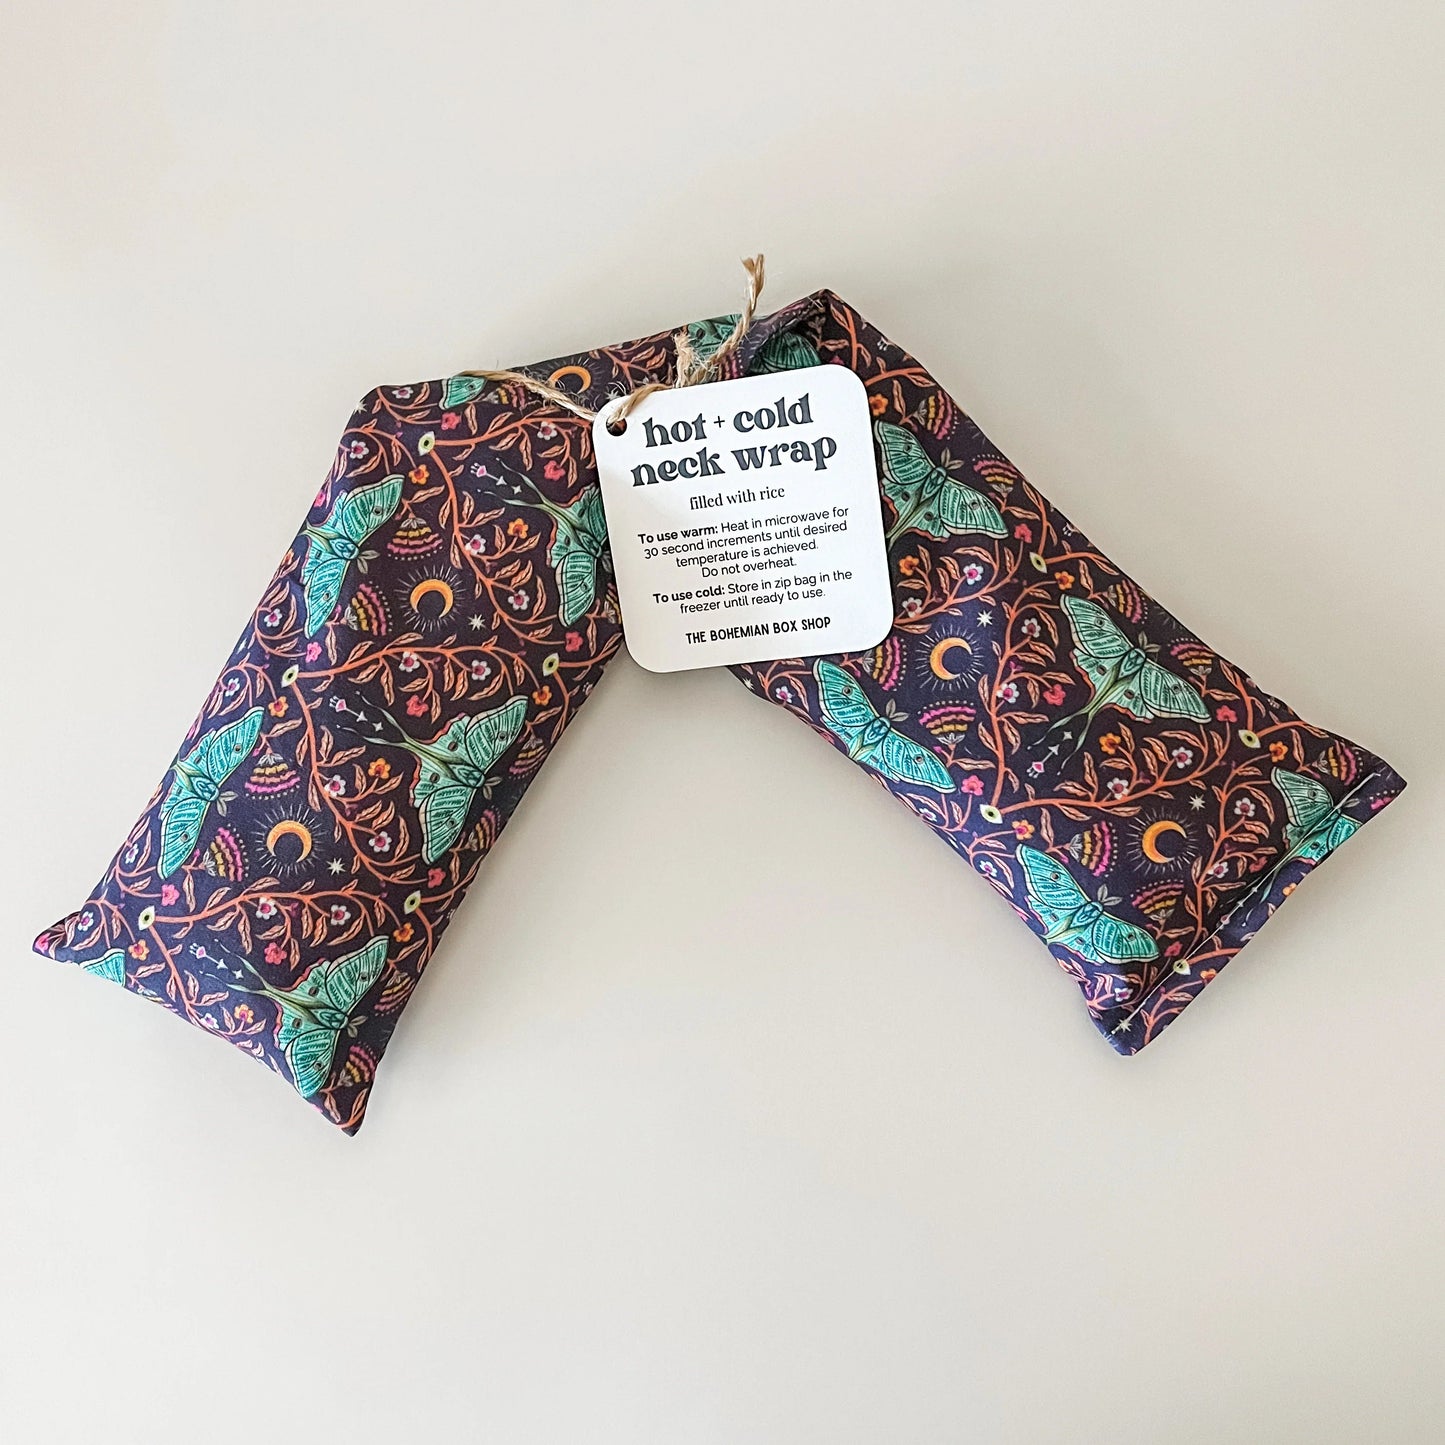 Luna Moth Hot and Cold Neck Wrap - Microwaveable Rice Packs